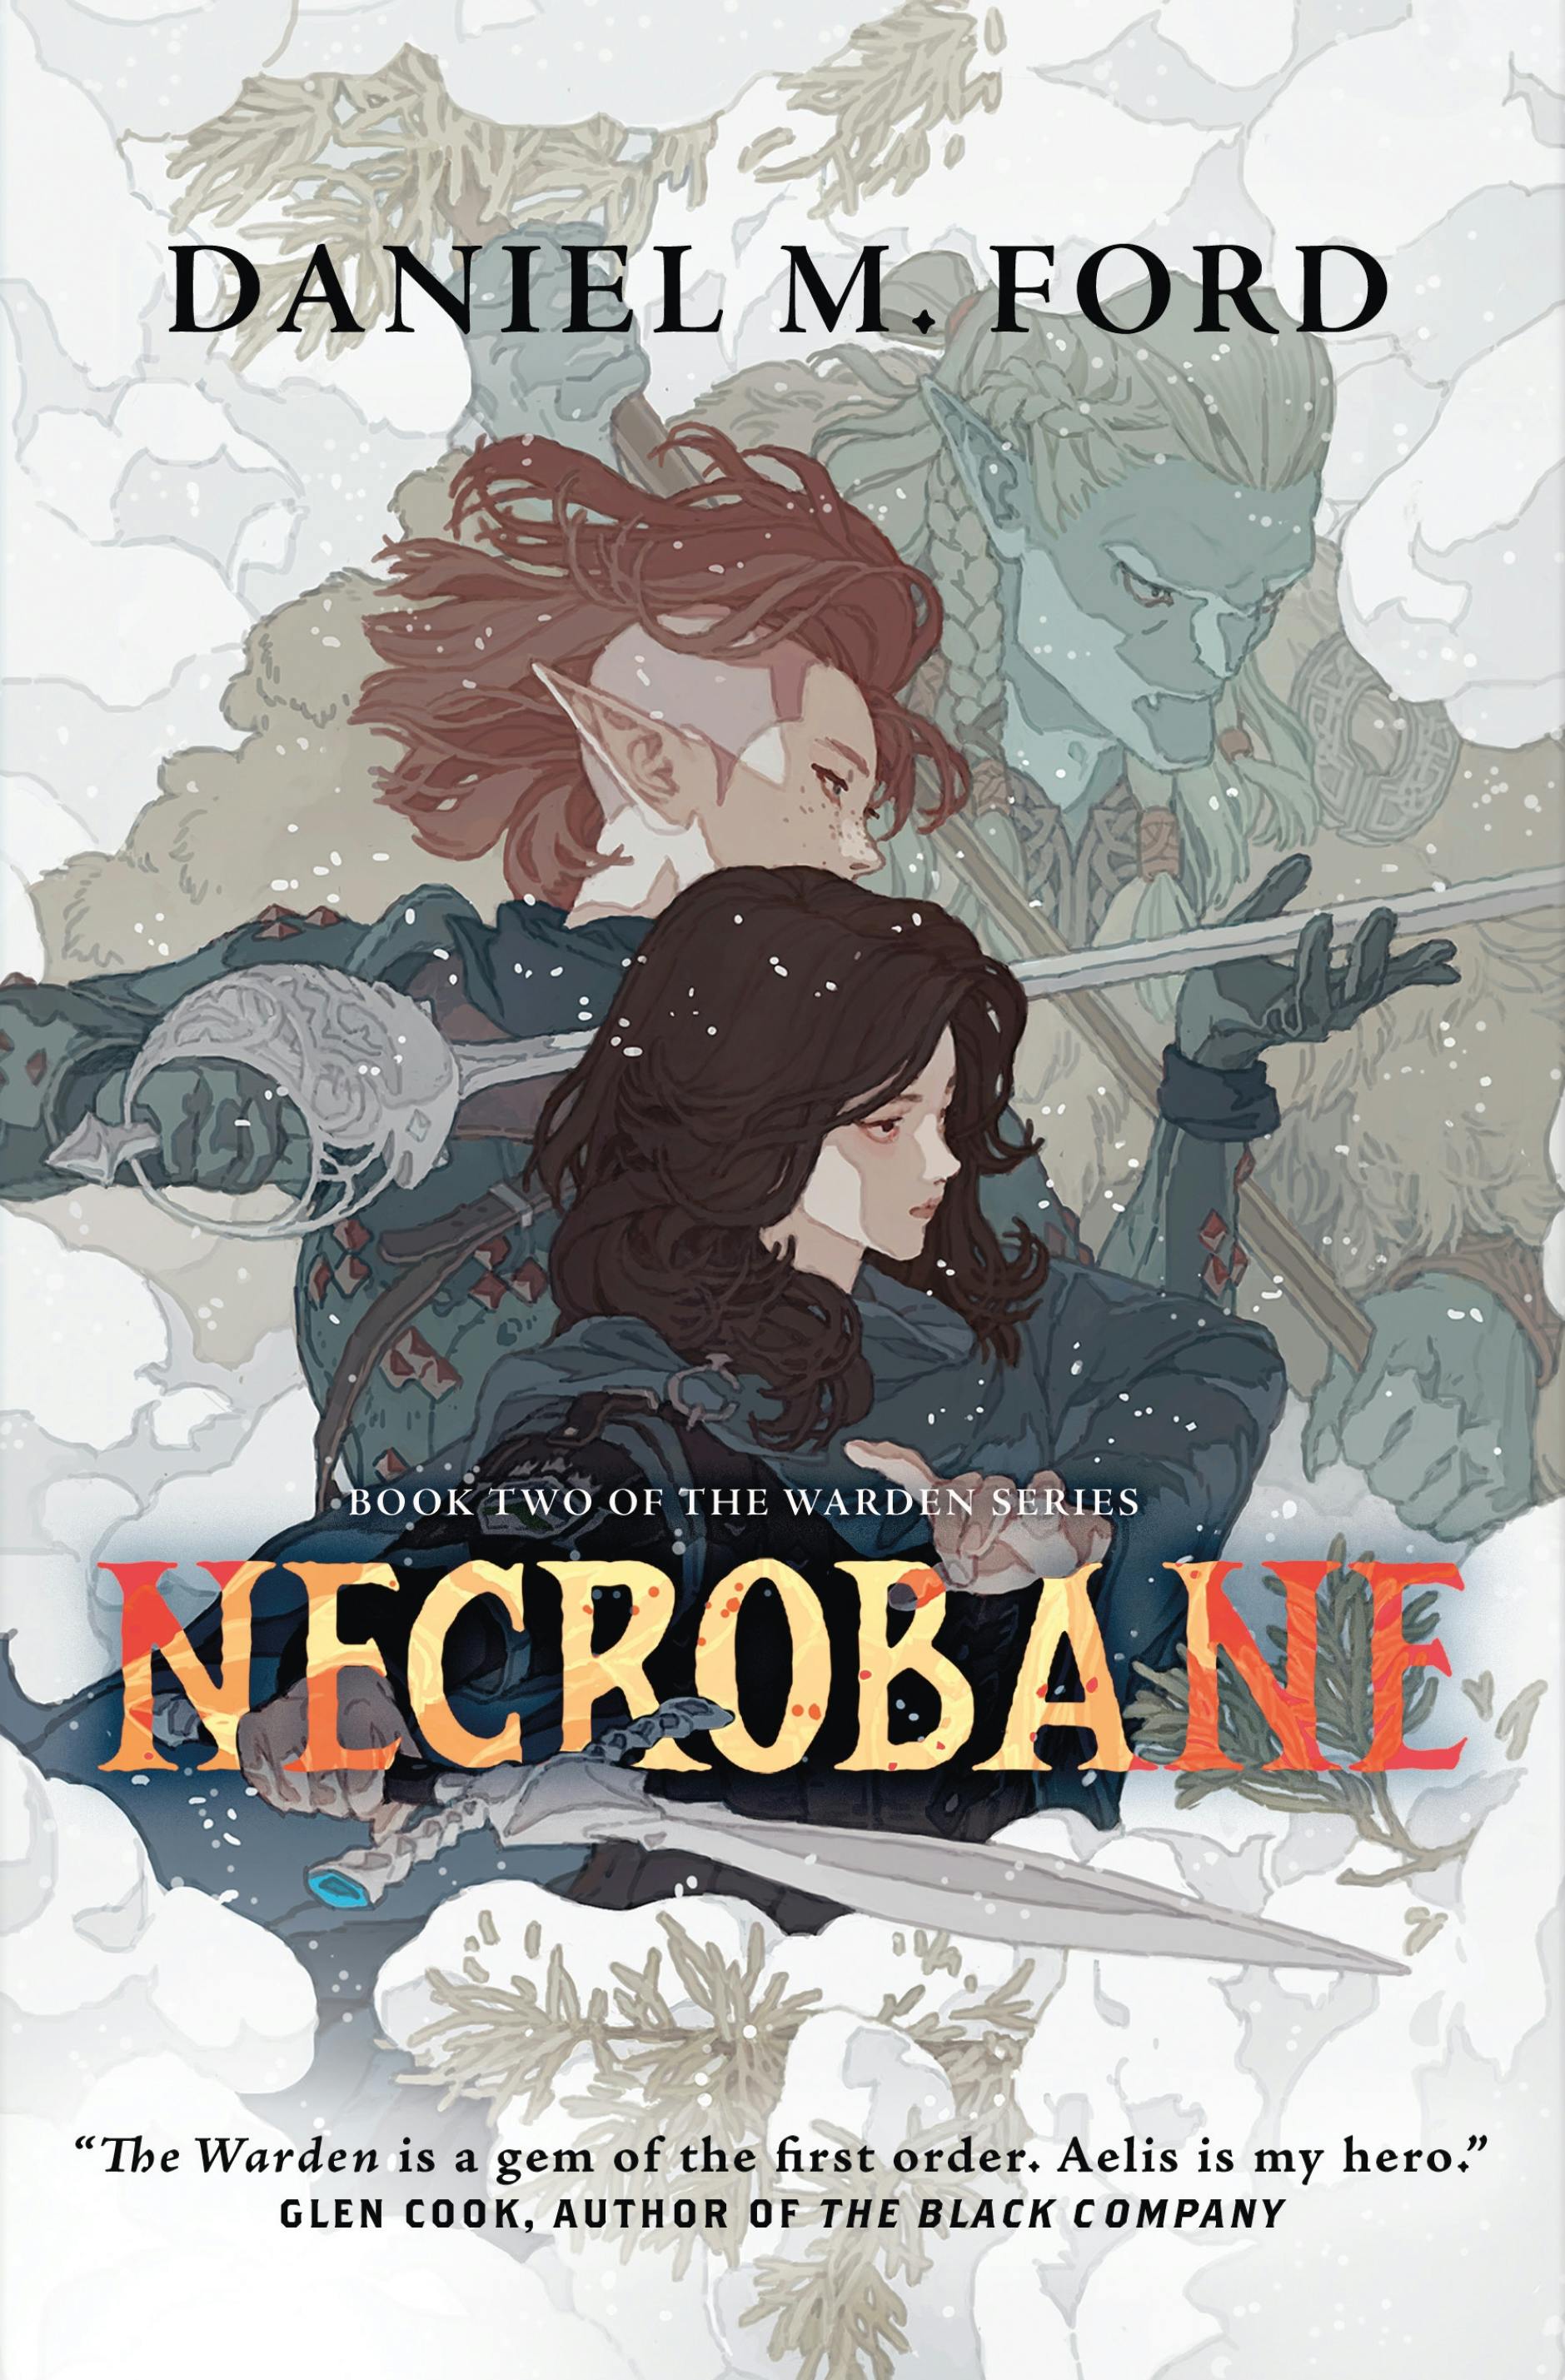 Cover for the book titled as: Necrobane